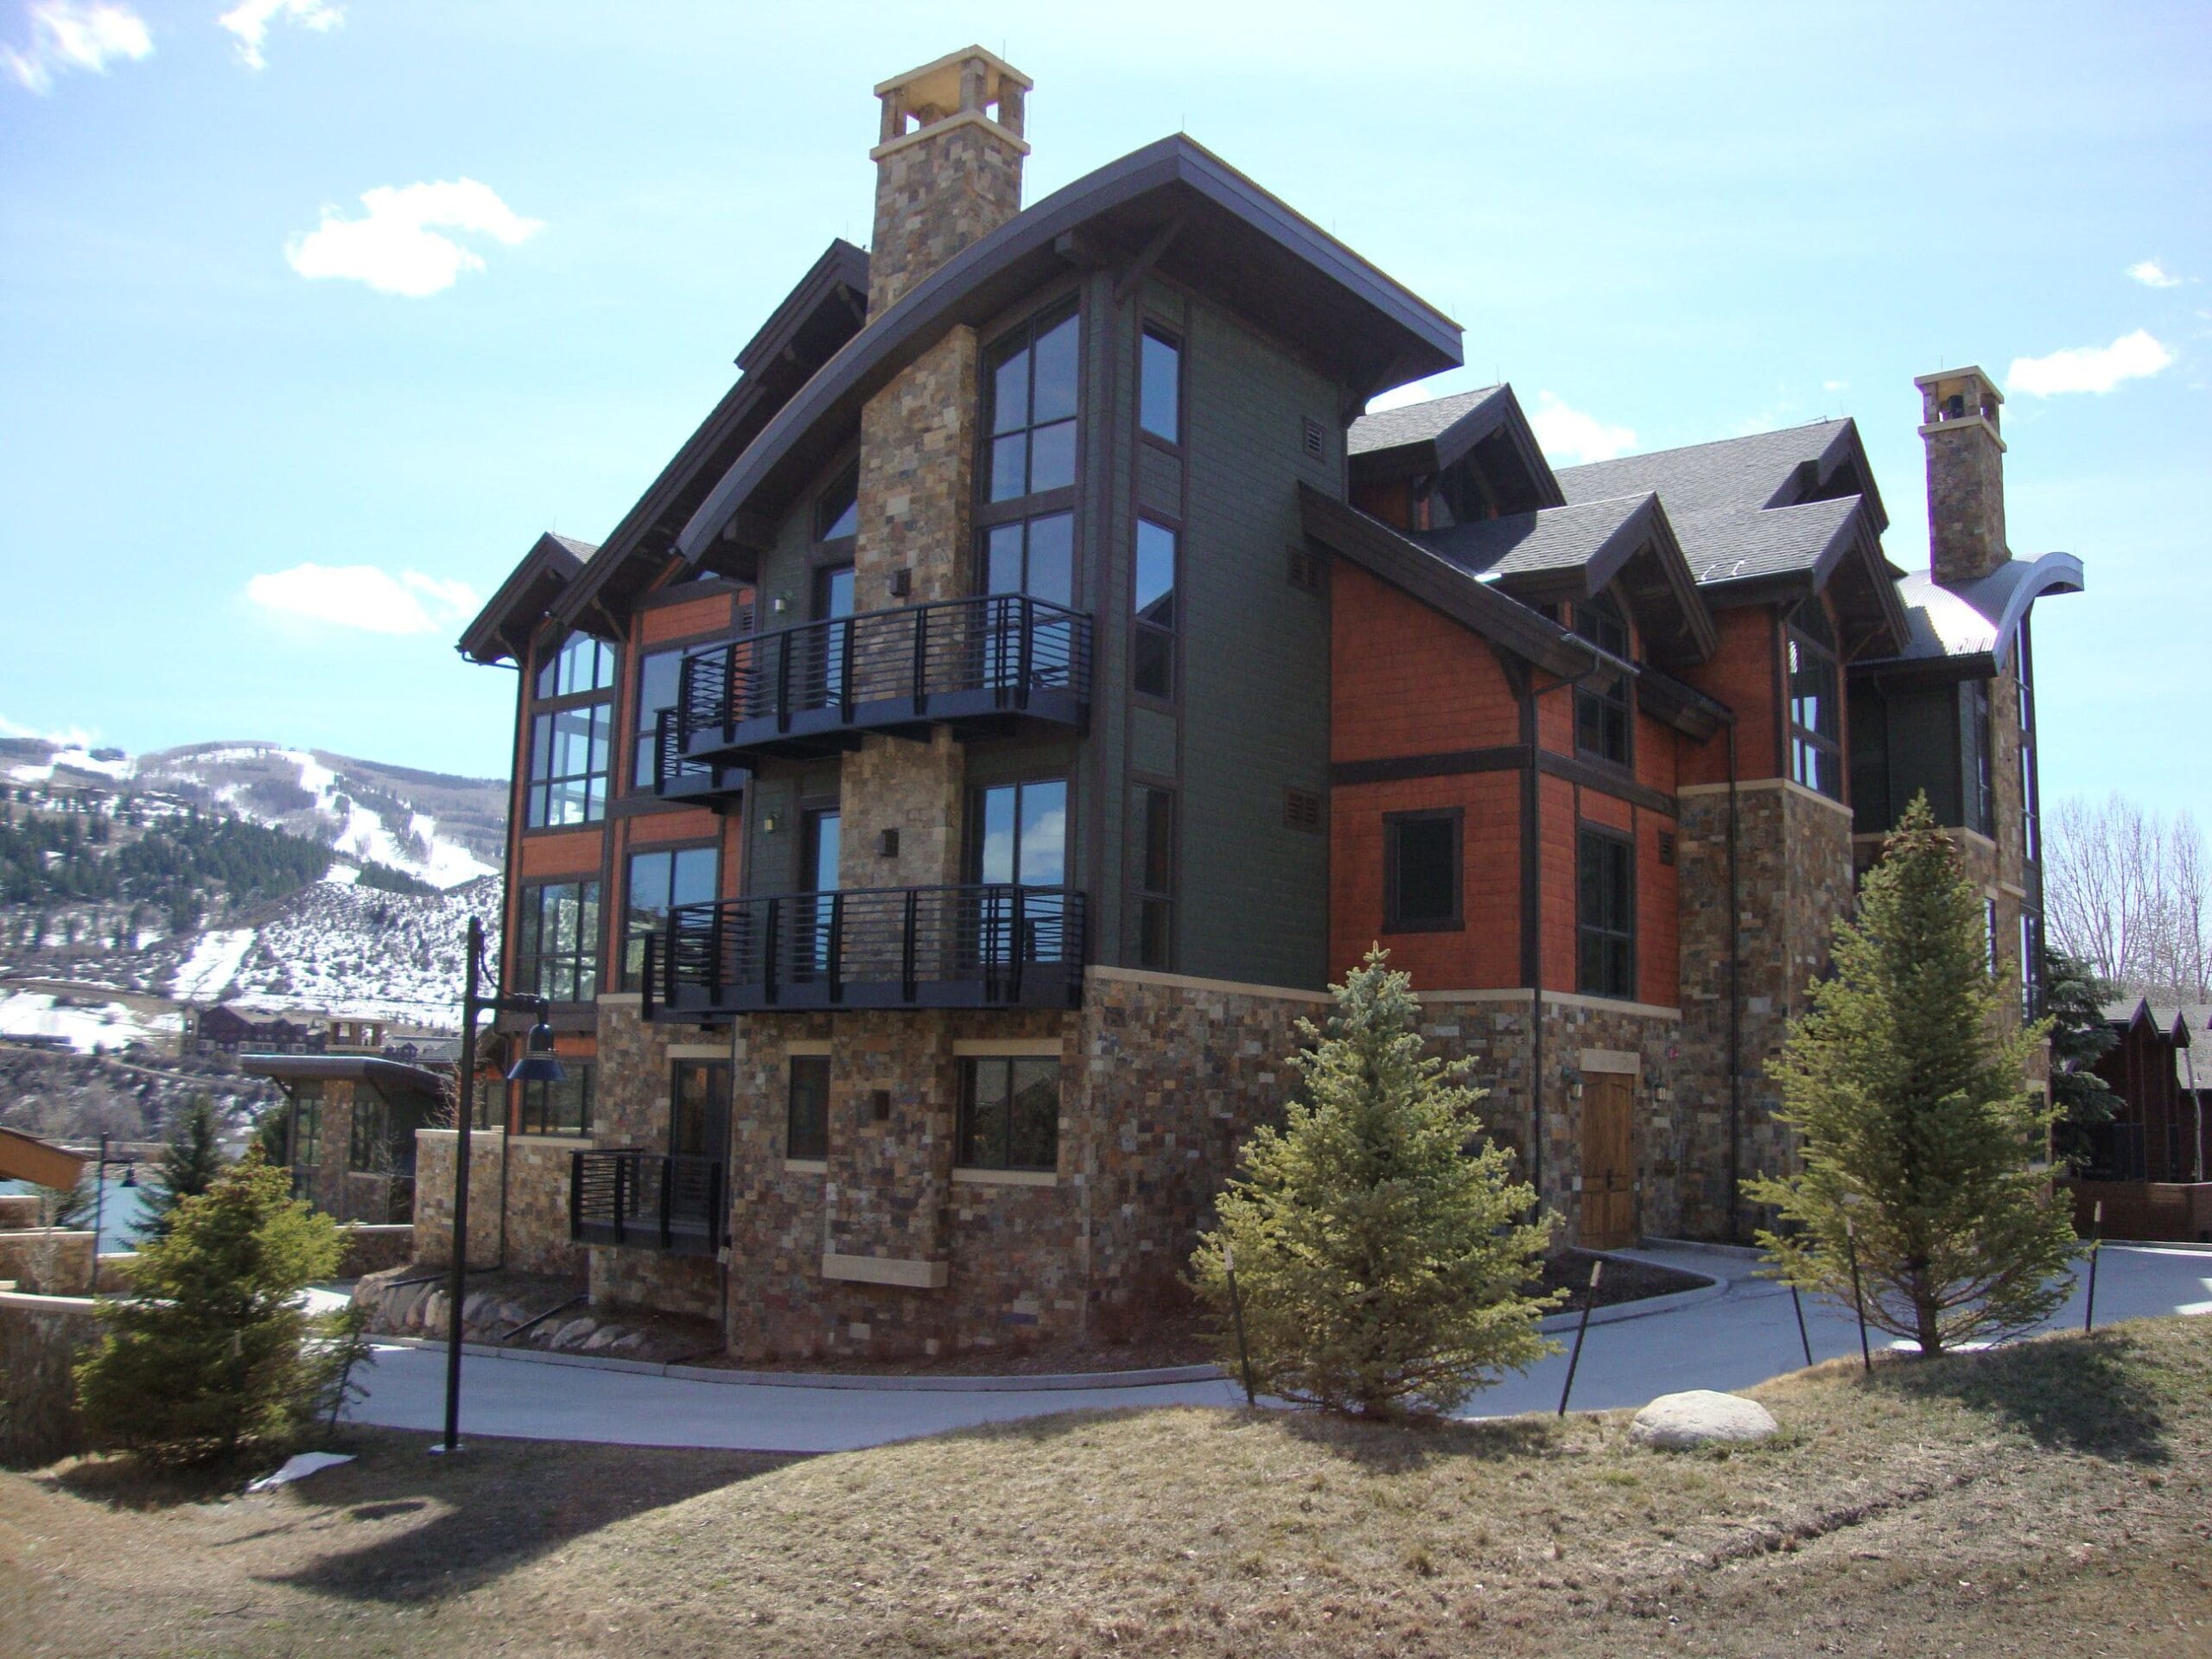 Exterior of Lodge in Mountains.